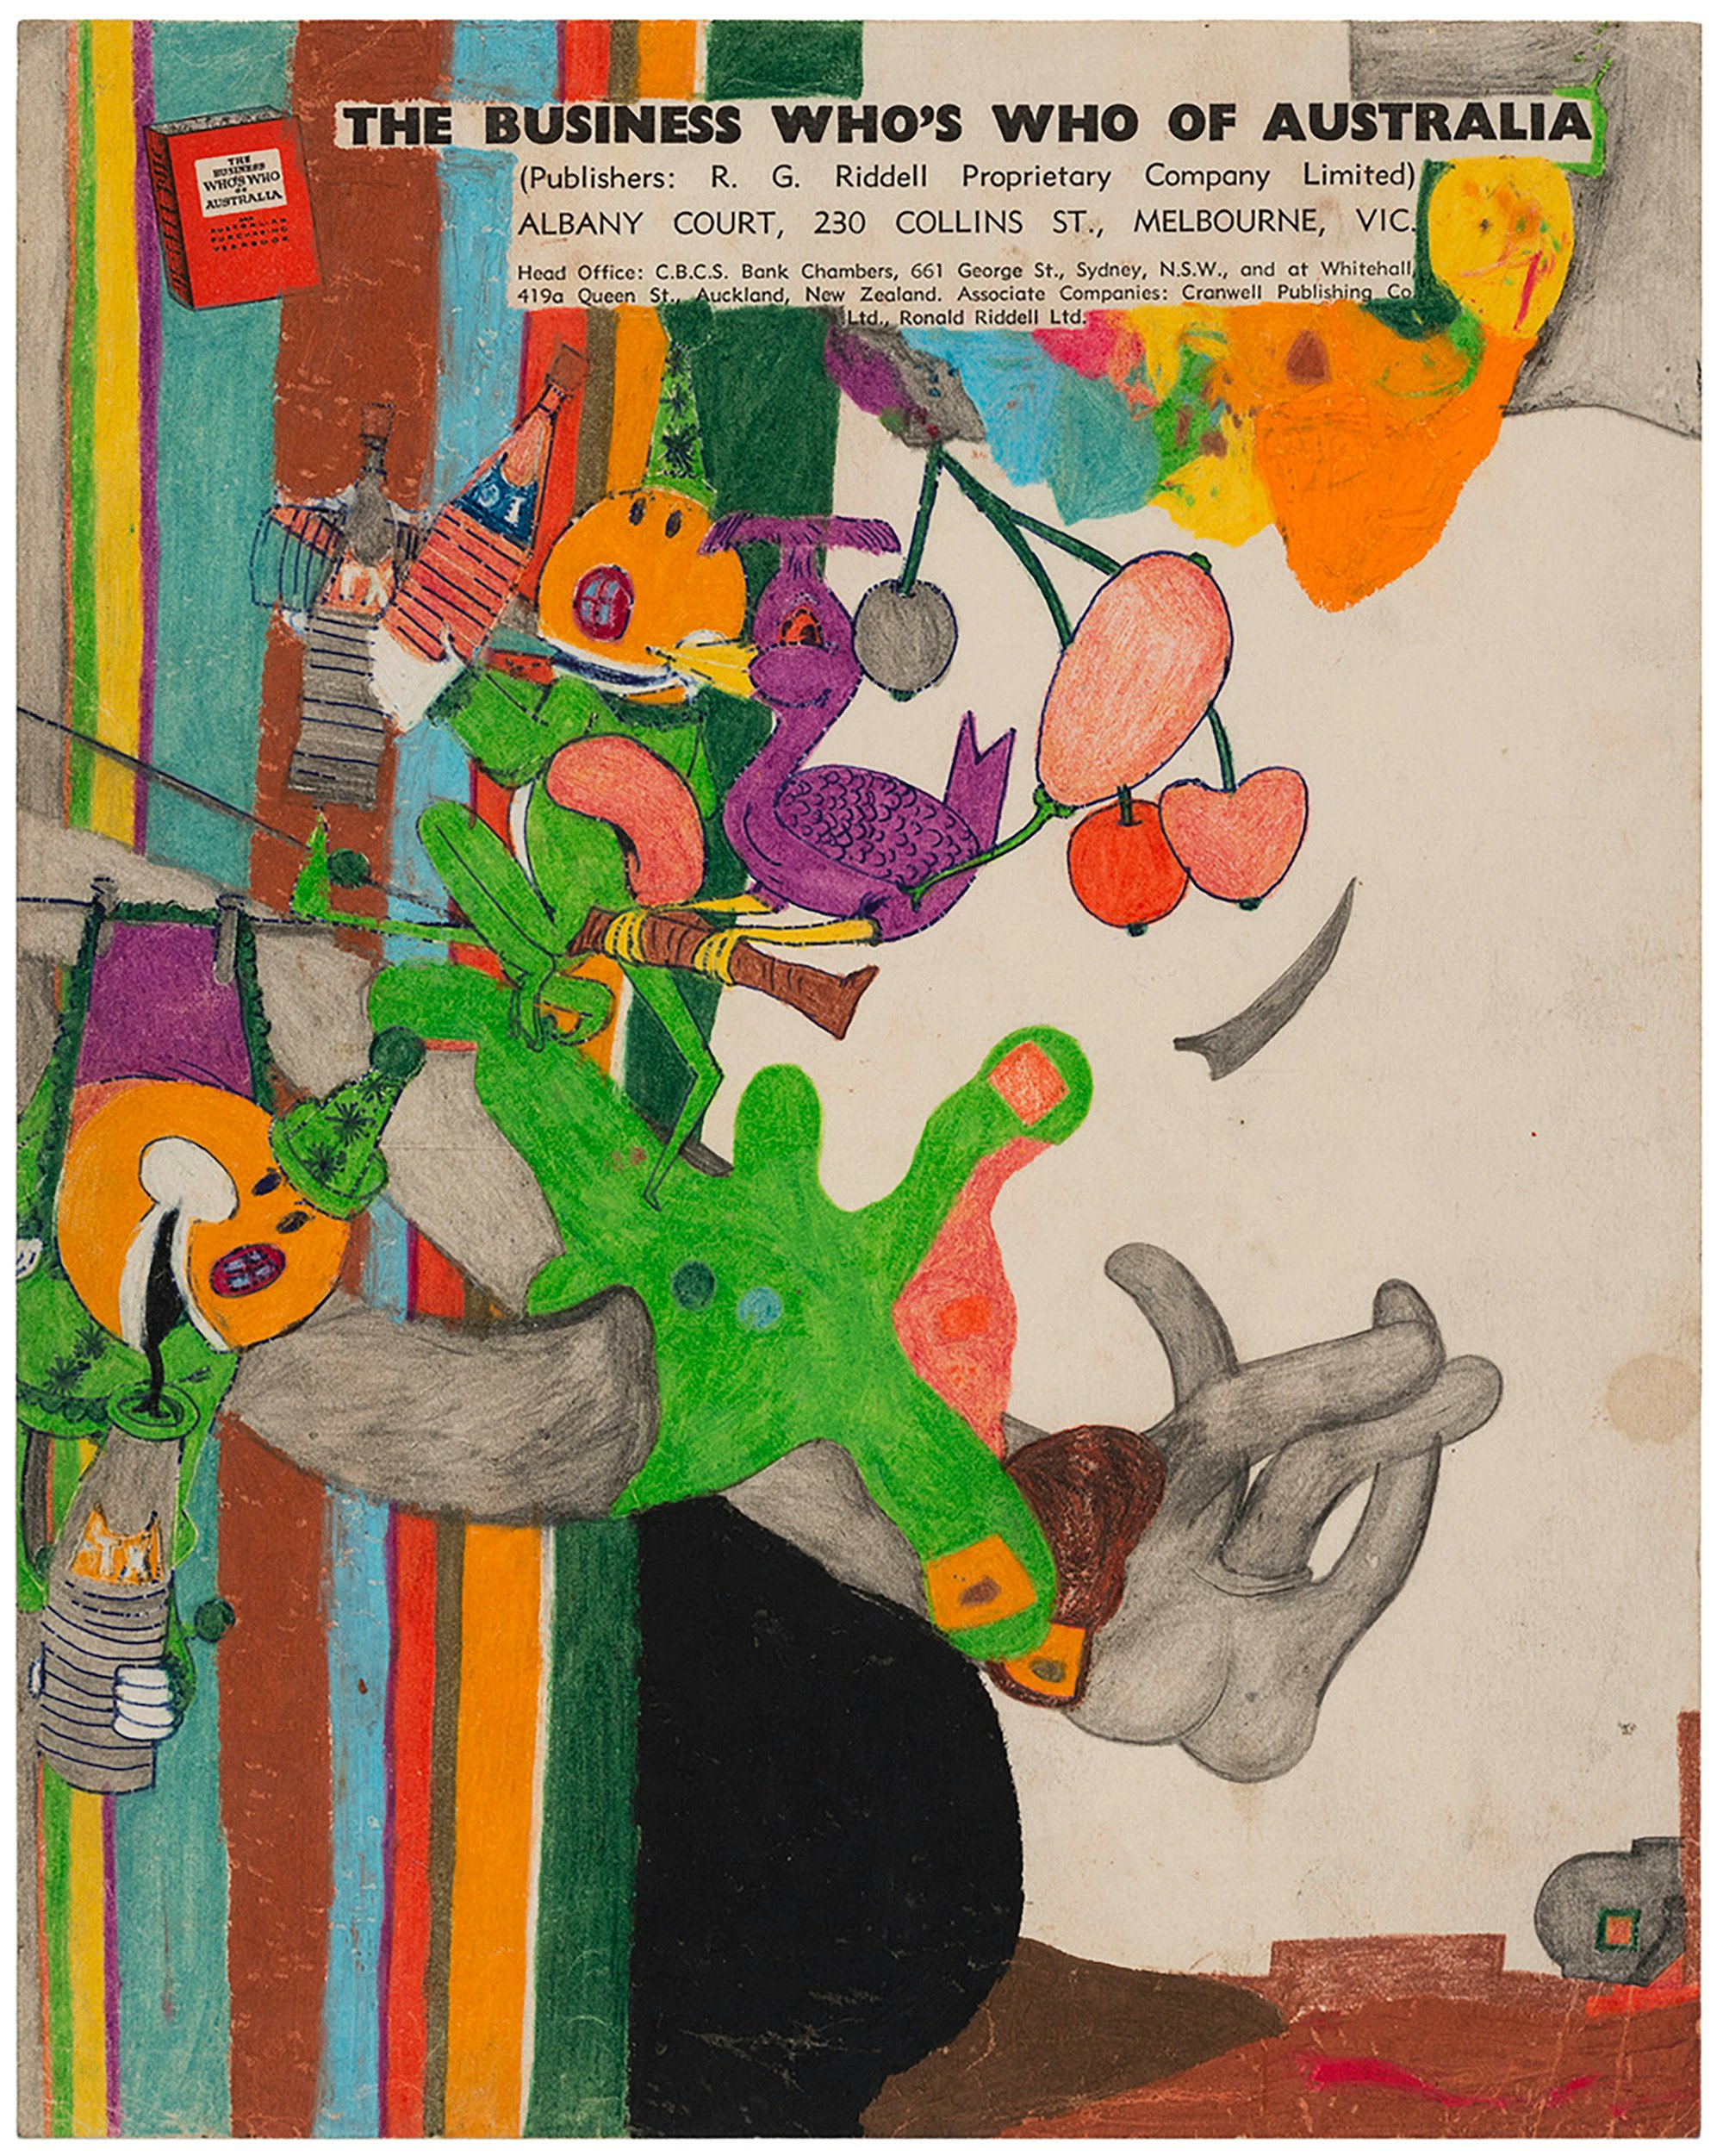 Susan Te Kahurangi King, <em>Untitled</em>, ca. 1967–70. Crayon, ink, colored pencil and graphite on paper, 10.25 x 8.25 inches. Courtesy Andrew Edlin Gallery, New York. 